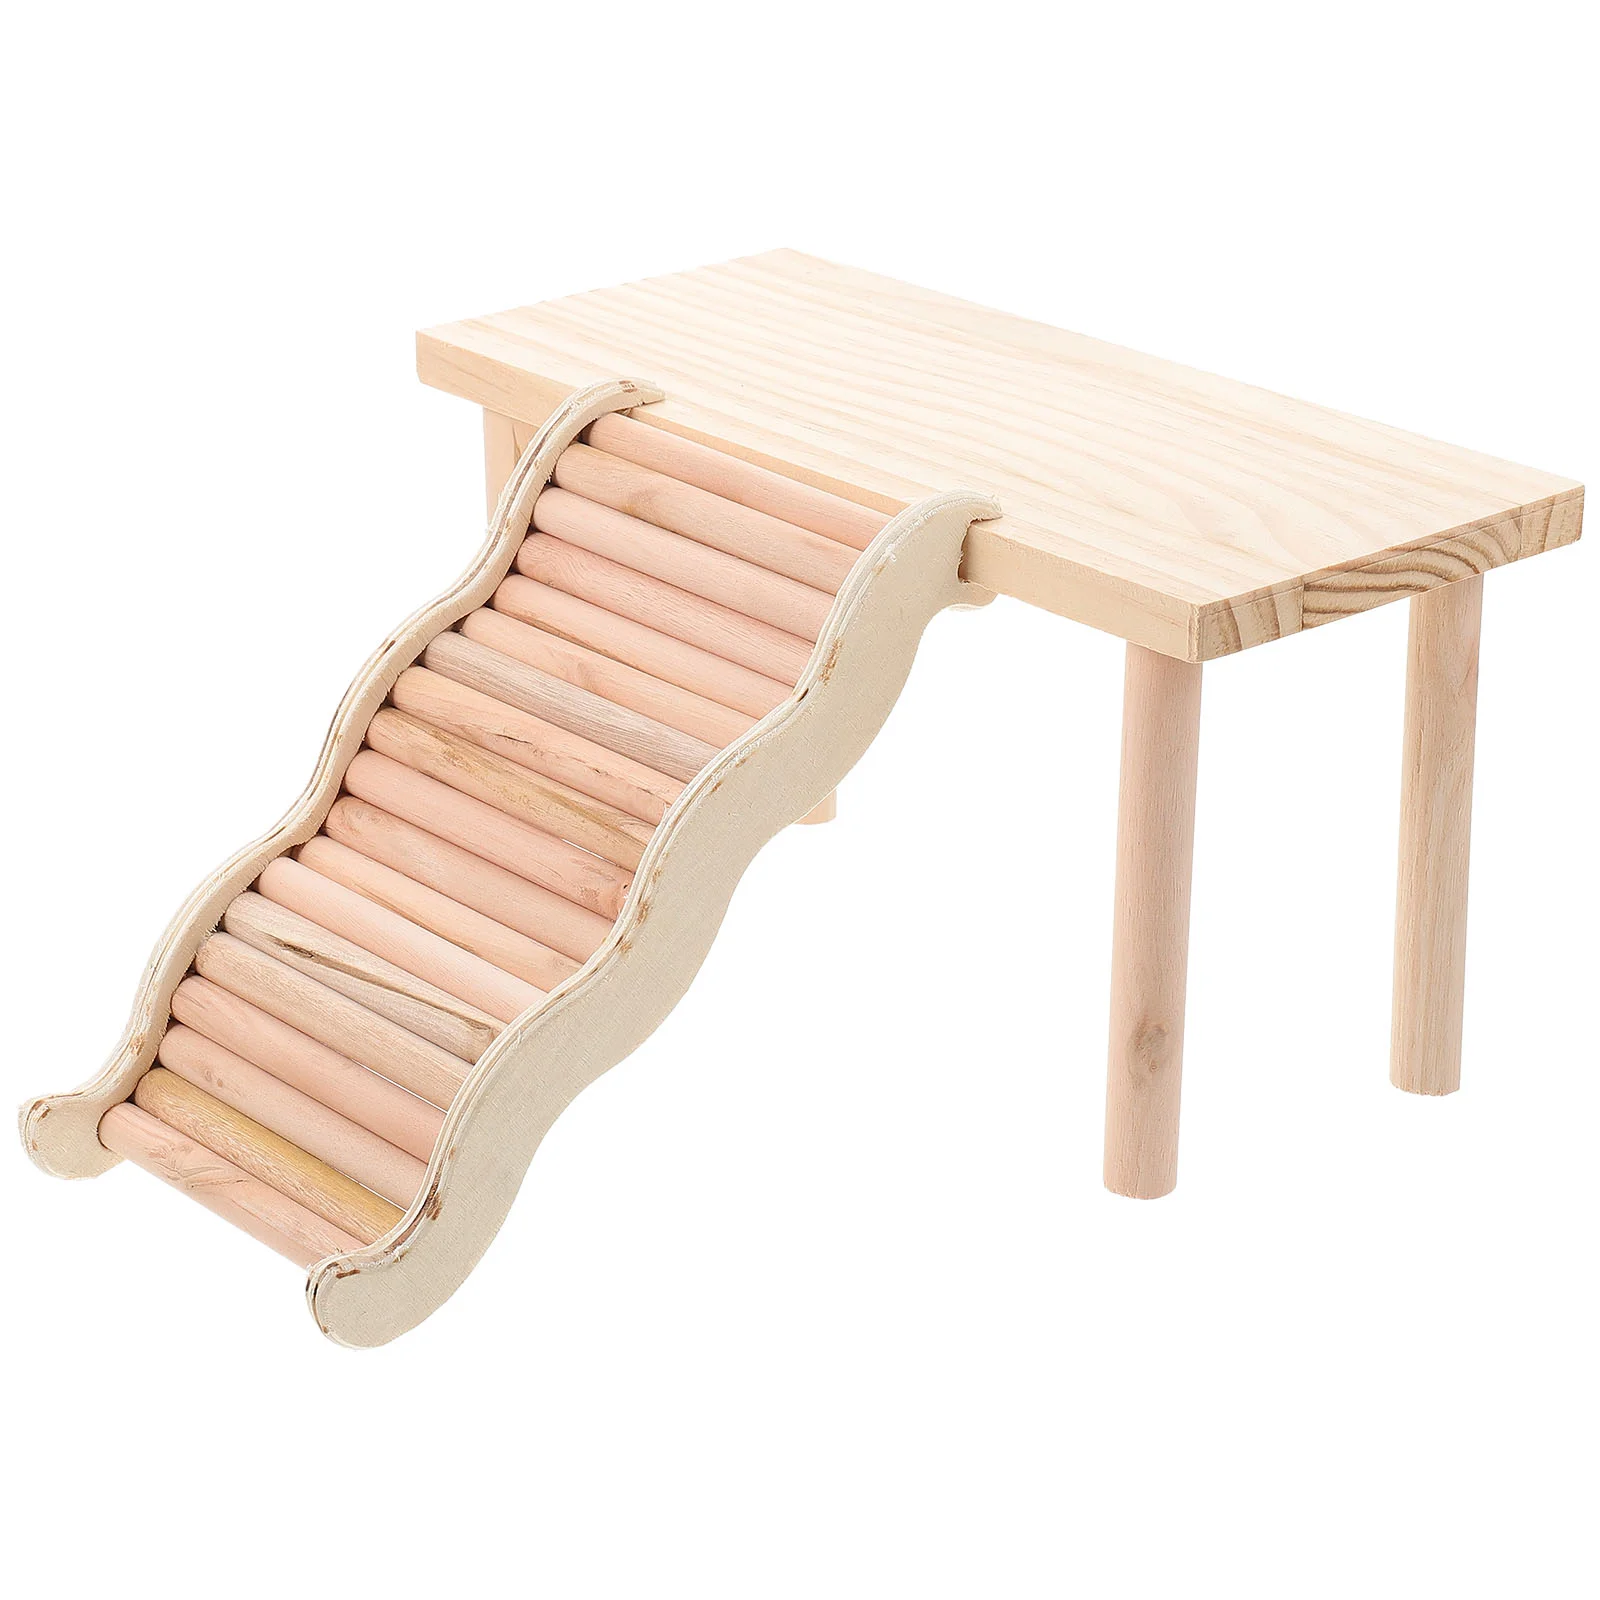 

1 Set of Hamster Playing Platform Wooden Ladder Toy for Small Pets Wooden Climbing Platform Toy